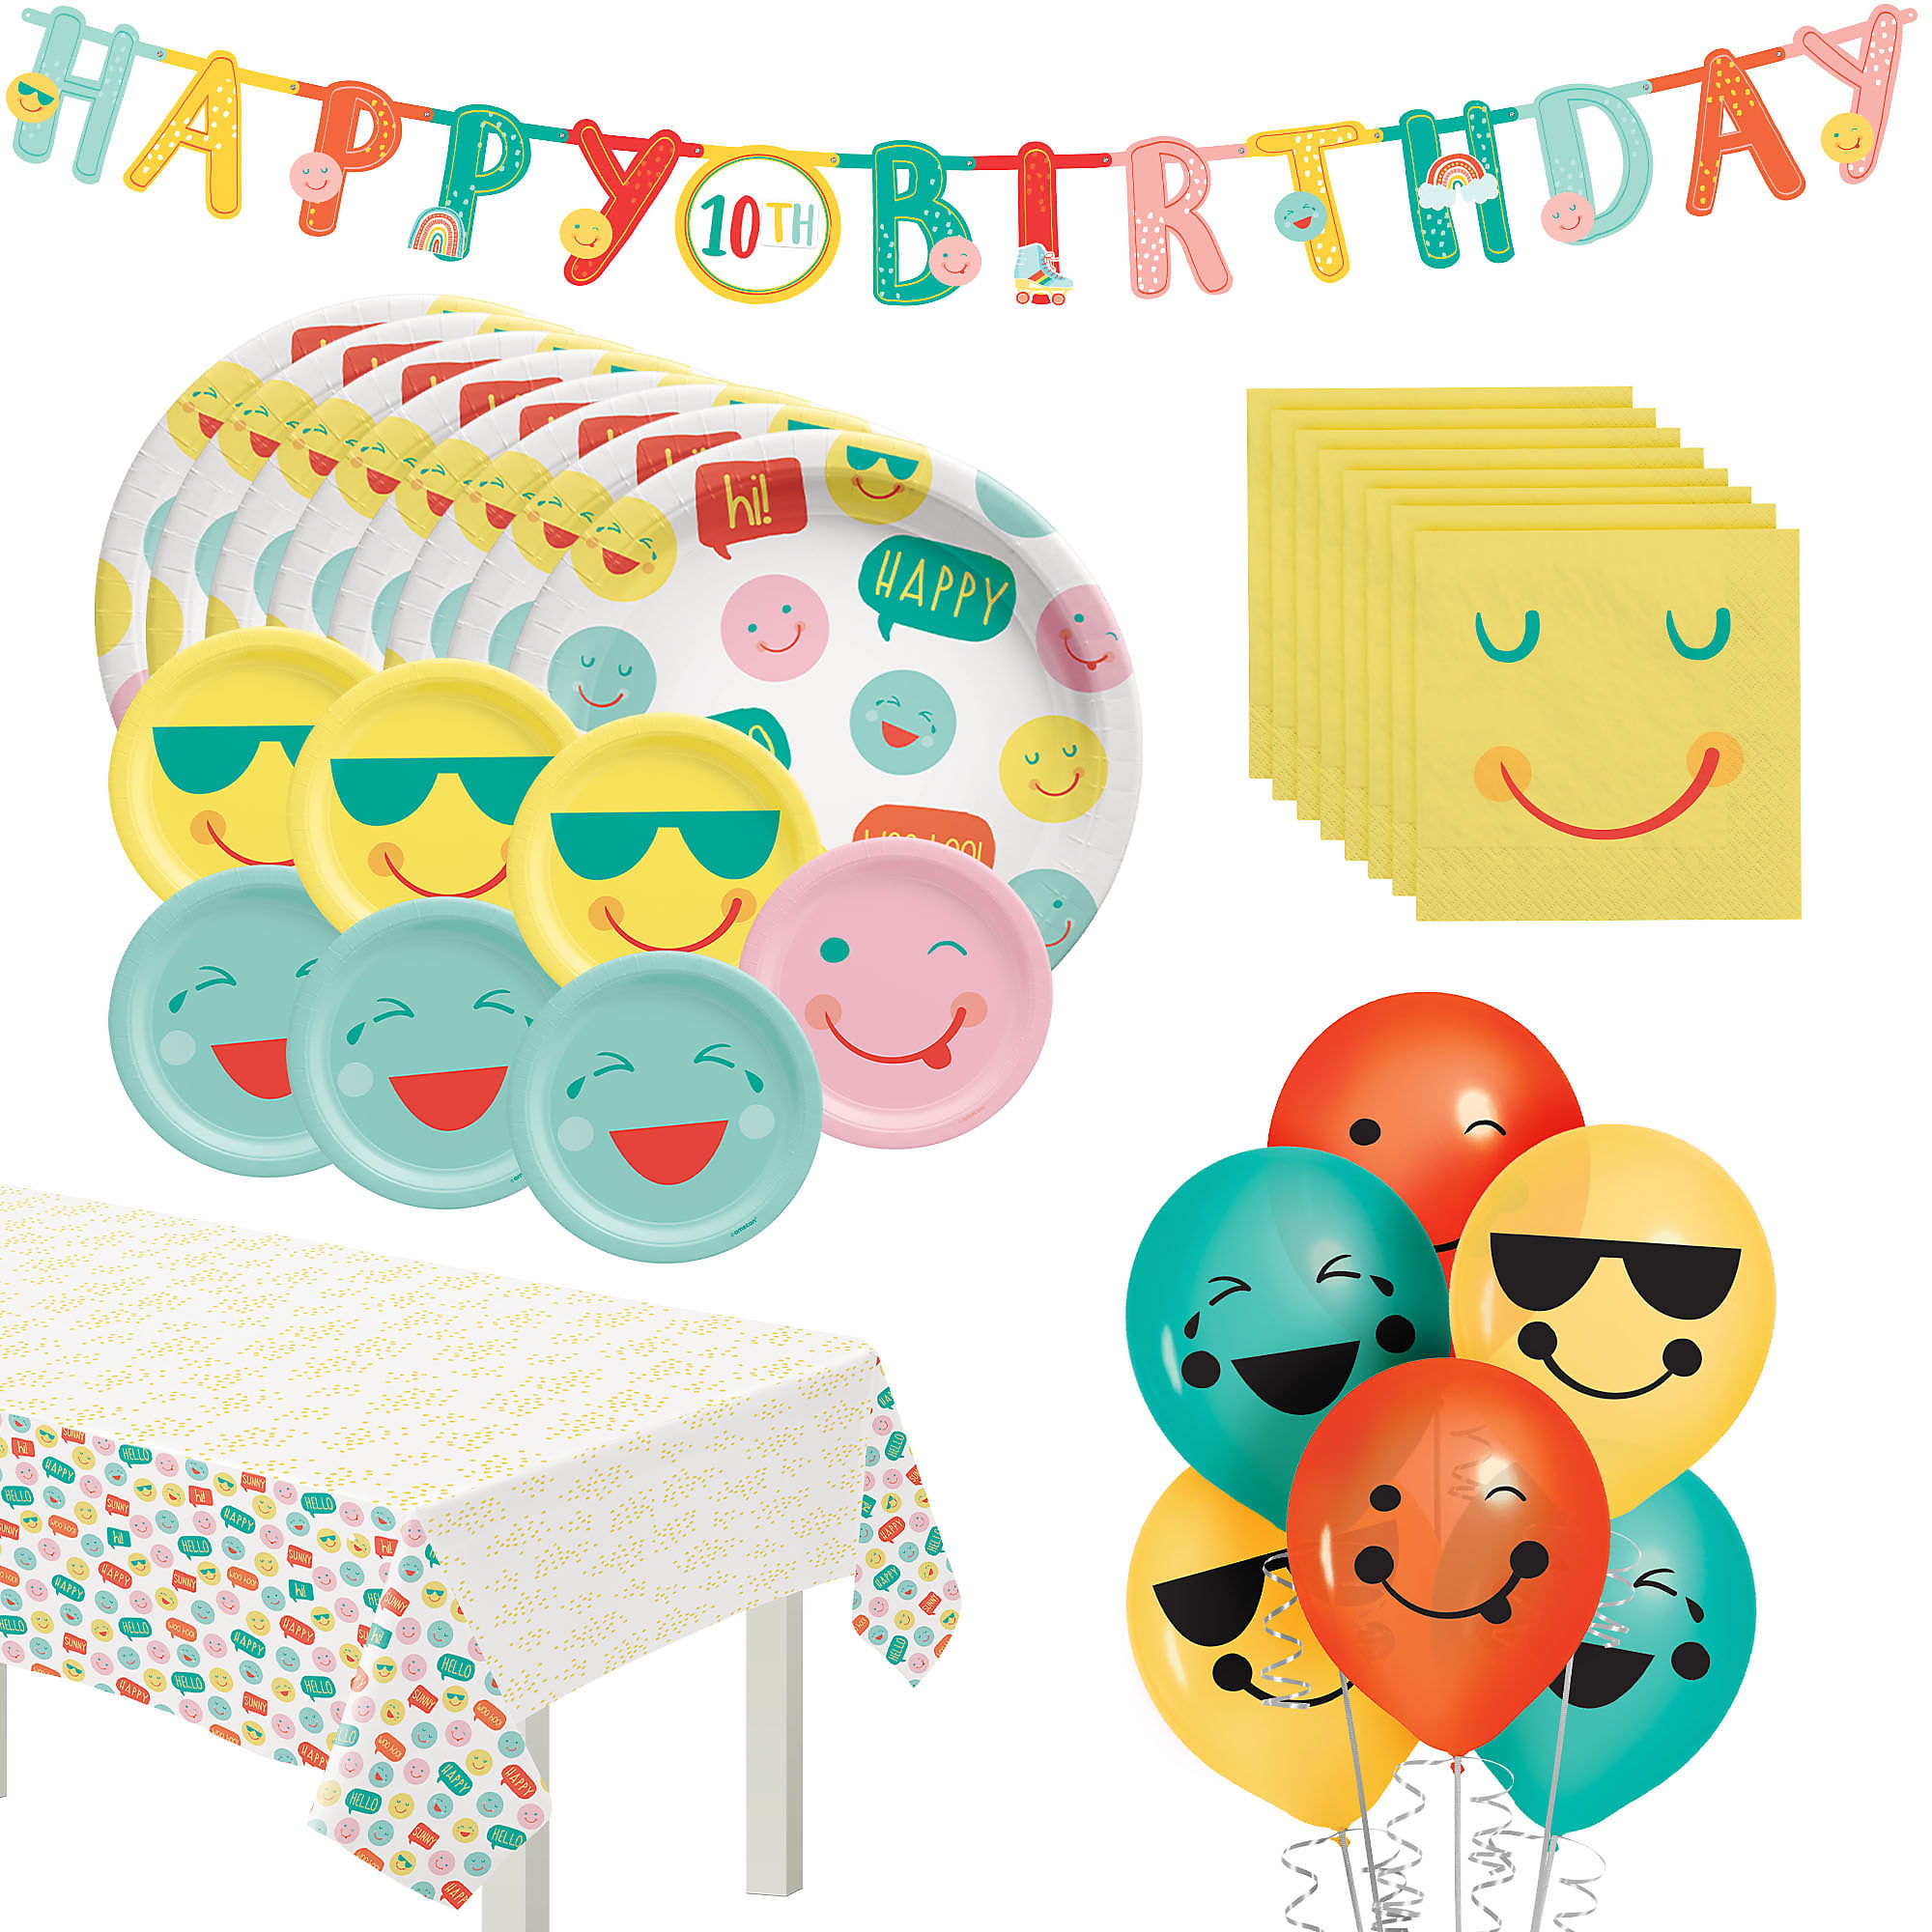 Smiley Tableware Balloons Banners & Decorations EMOJI Birthday Party Supplies 